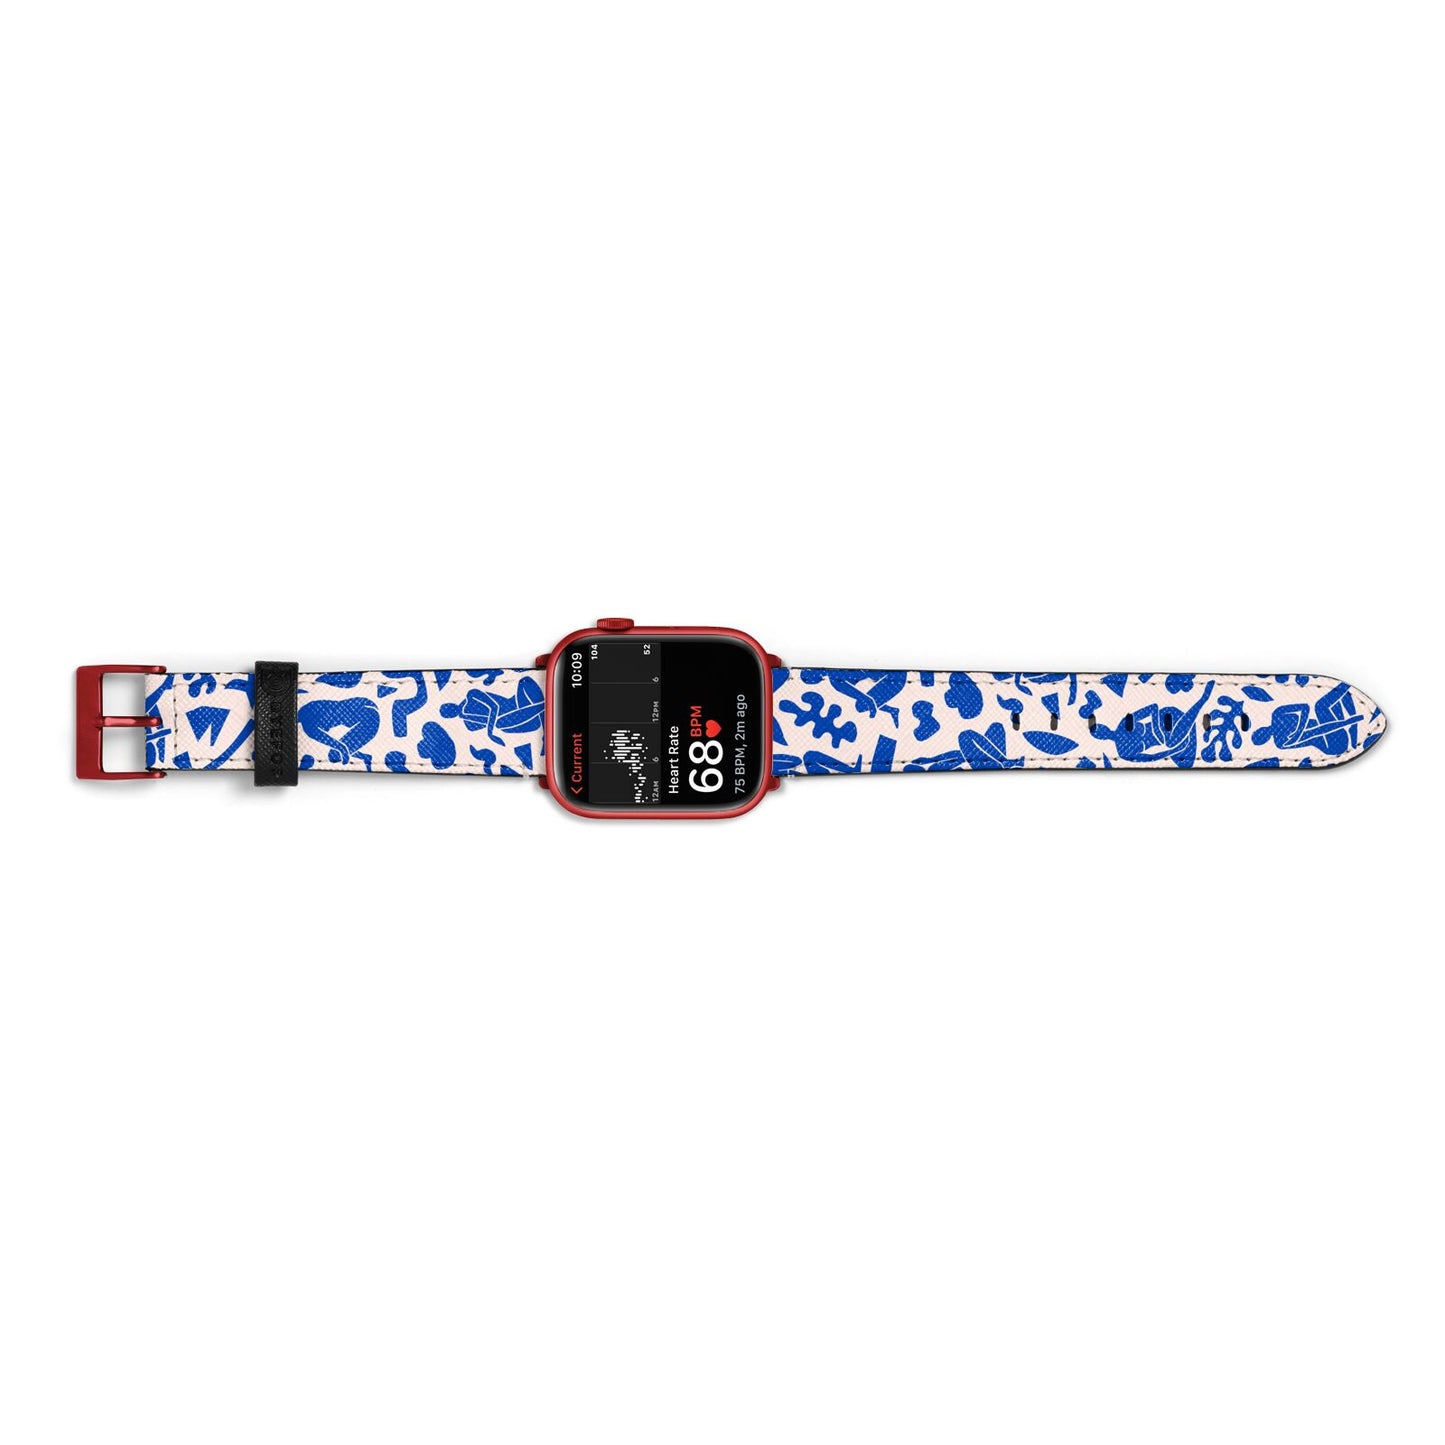 Abstract Art Apple Watch Strap Size 38mm Landscape Image Red Hardware